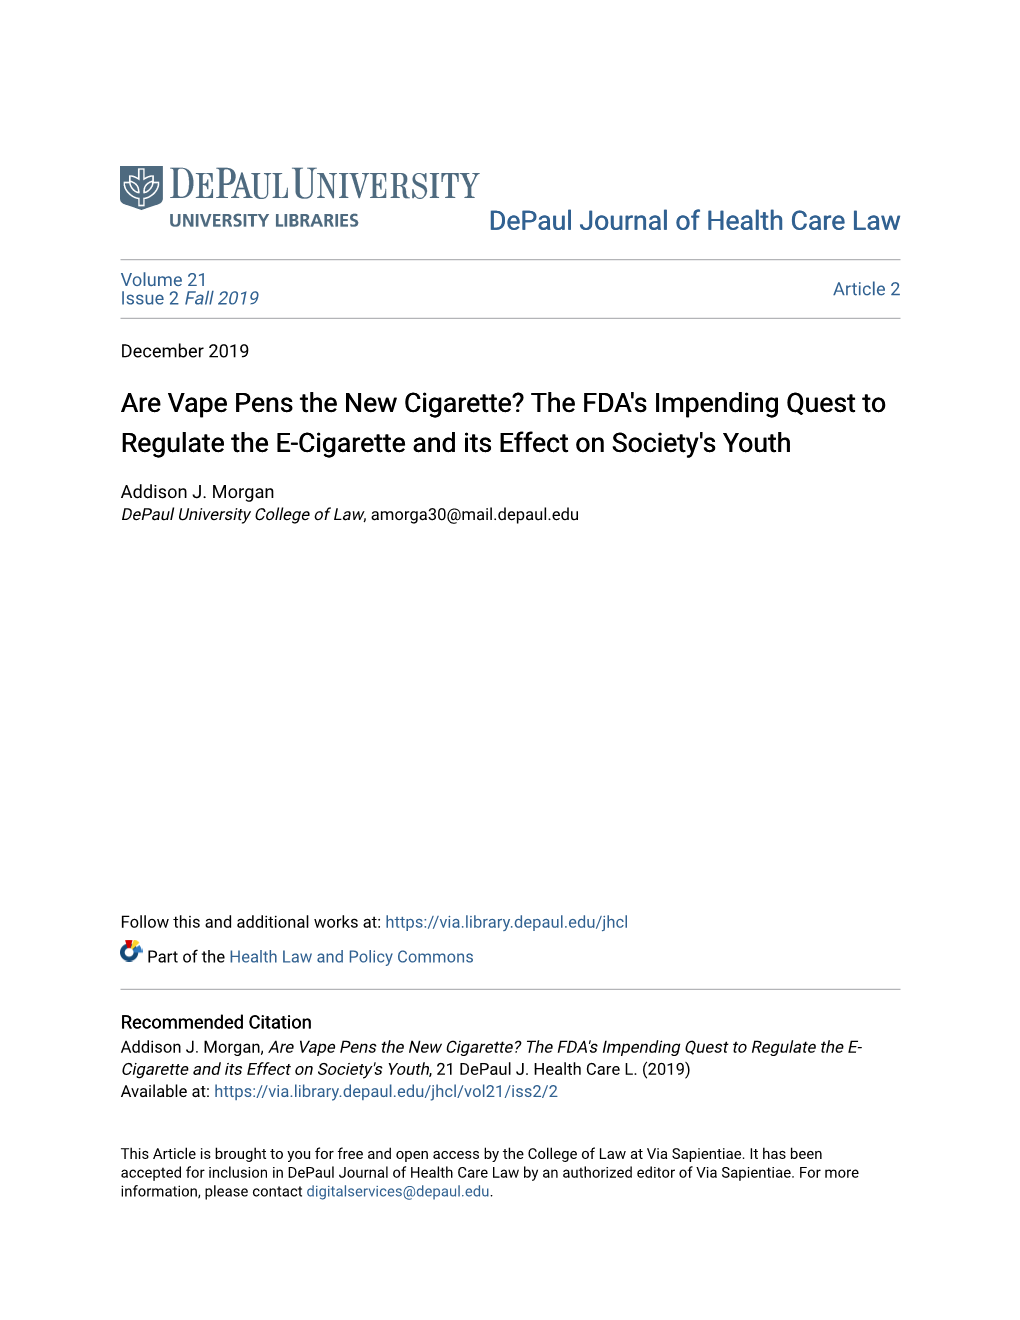 Are Vape Pens the New Cigarette? the FDA's Impending Quest to Regulate the E-Cigarette and Its Effect on Society's Youth